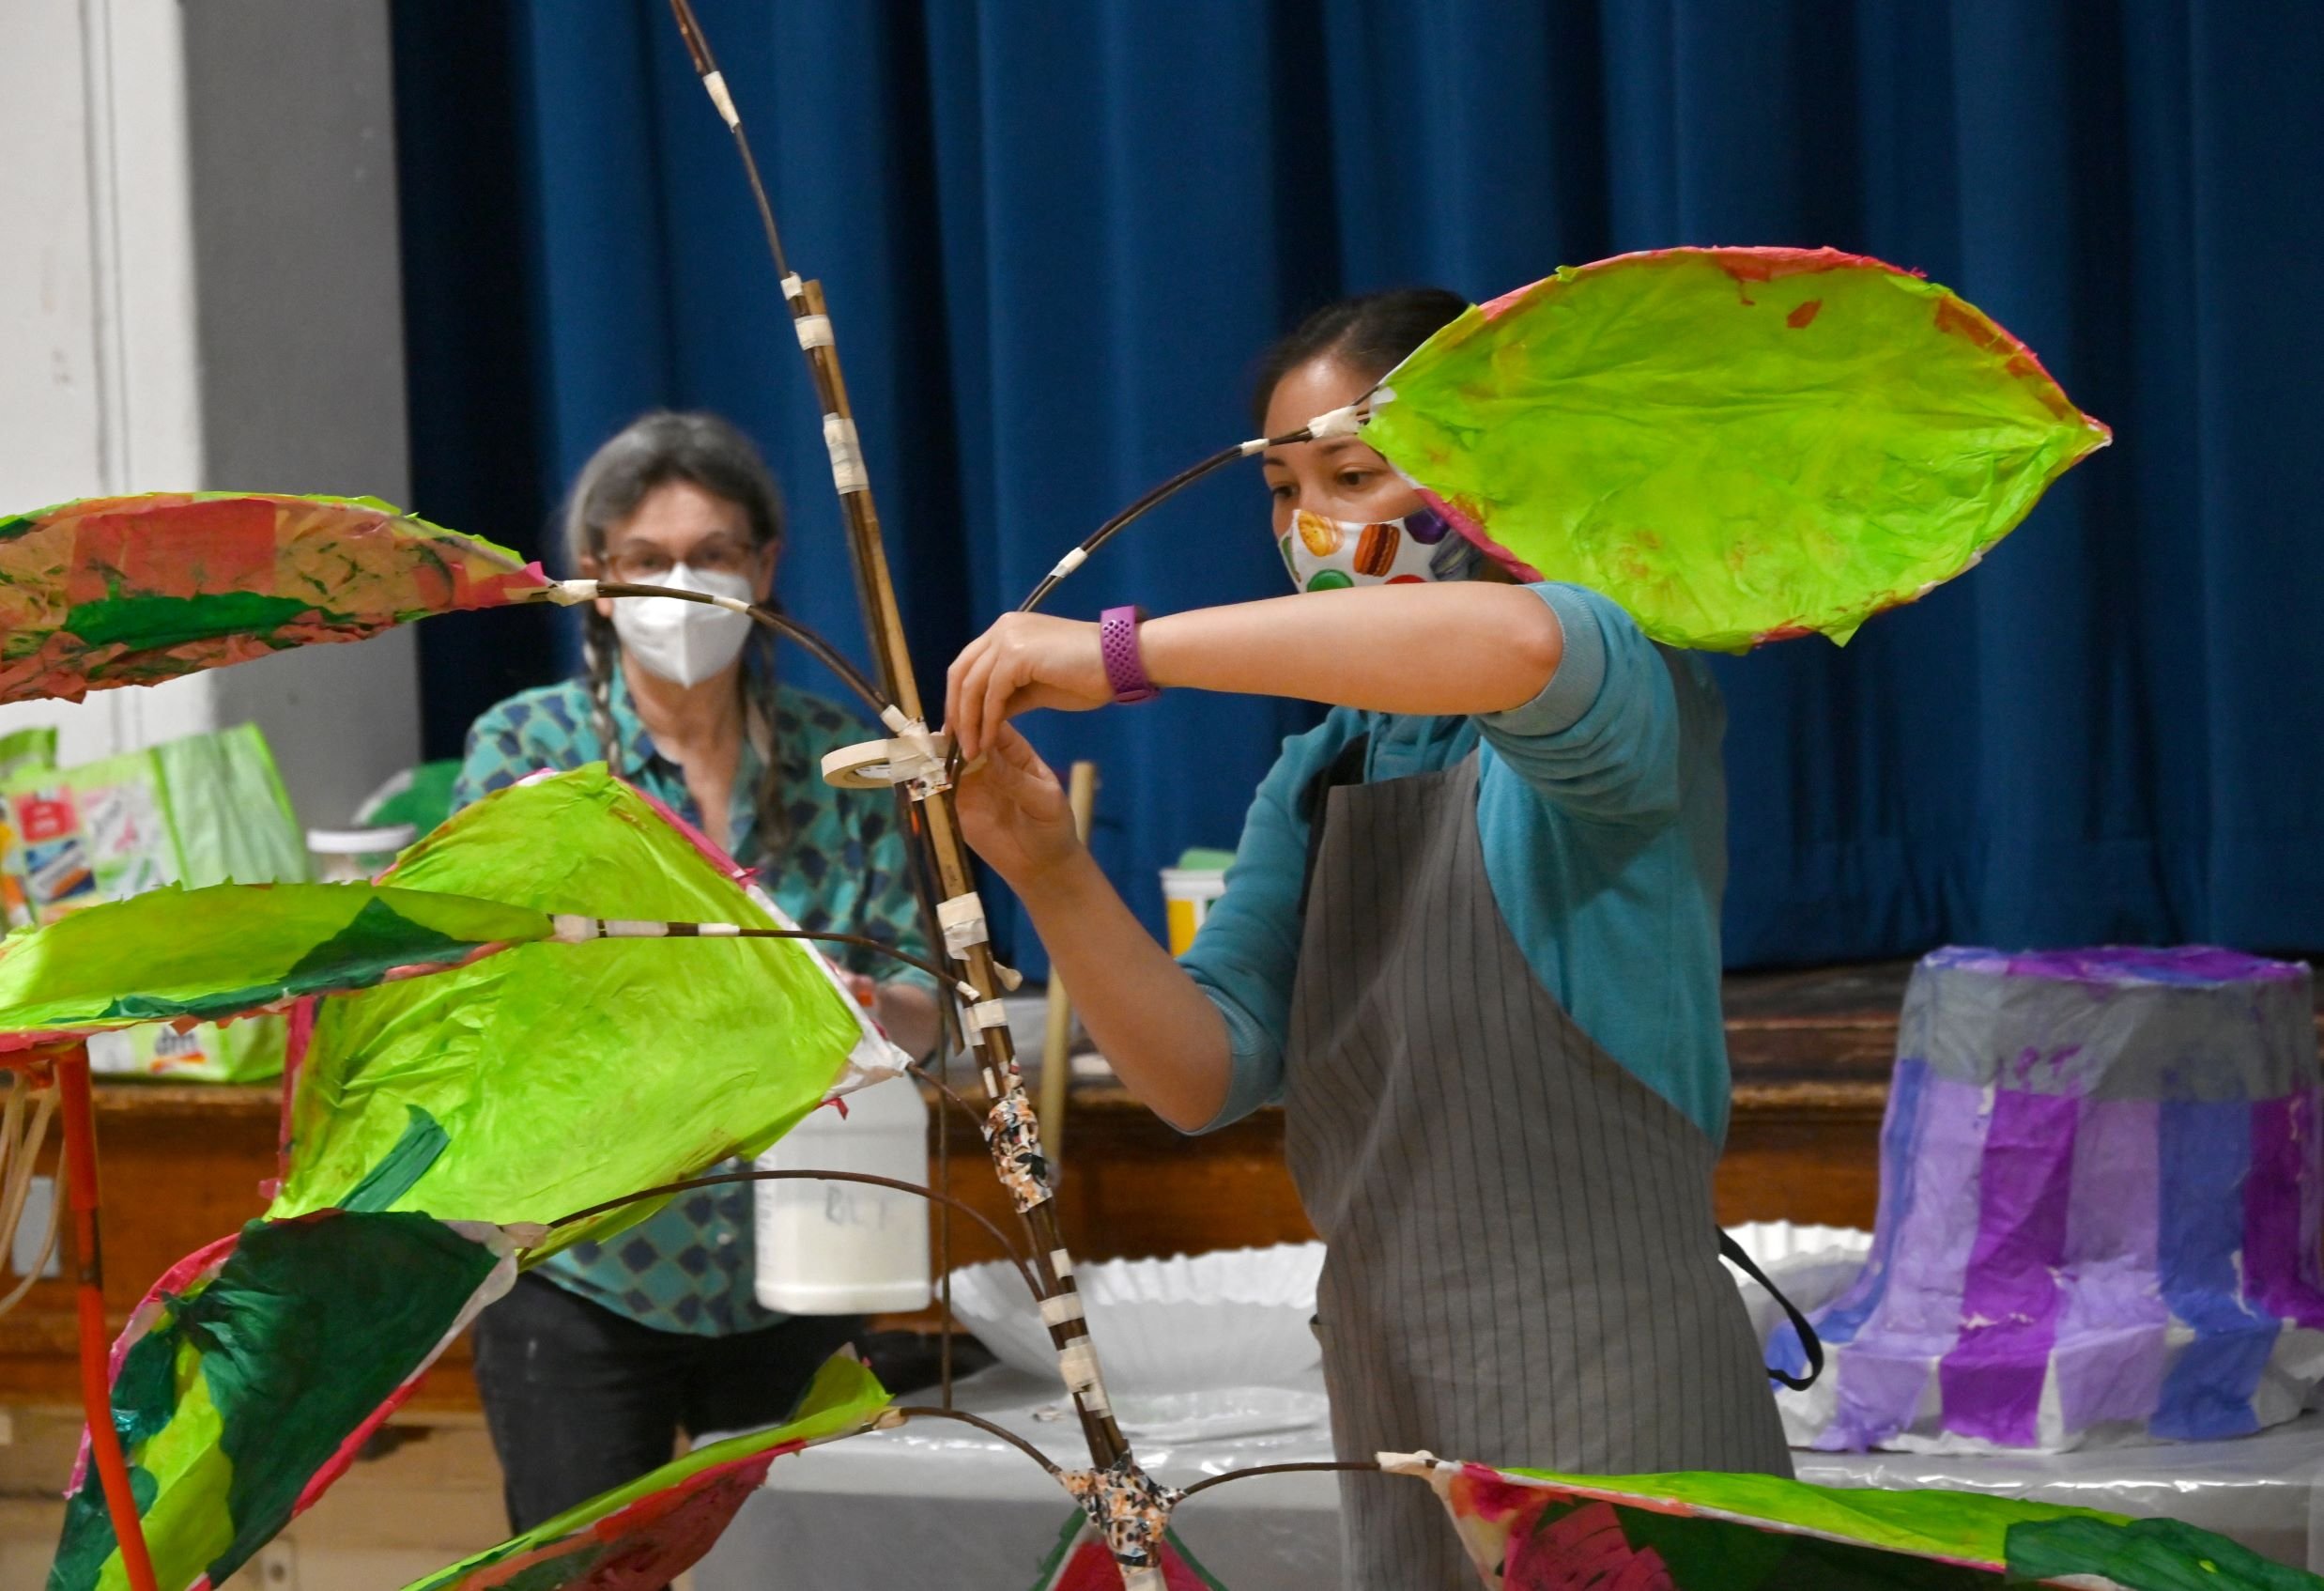  Mame McKee (left) looks on as Chiyomi McKibbin attaches leaves to her large plant lantern. Photo by Gordon Miller 